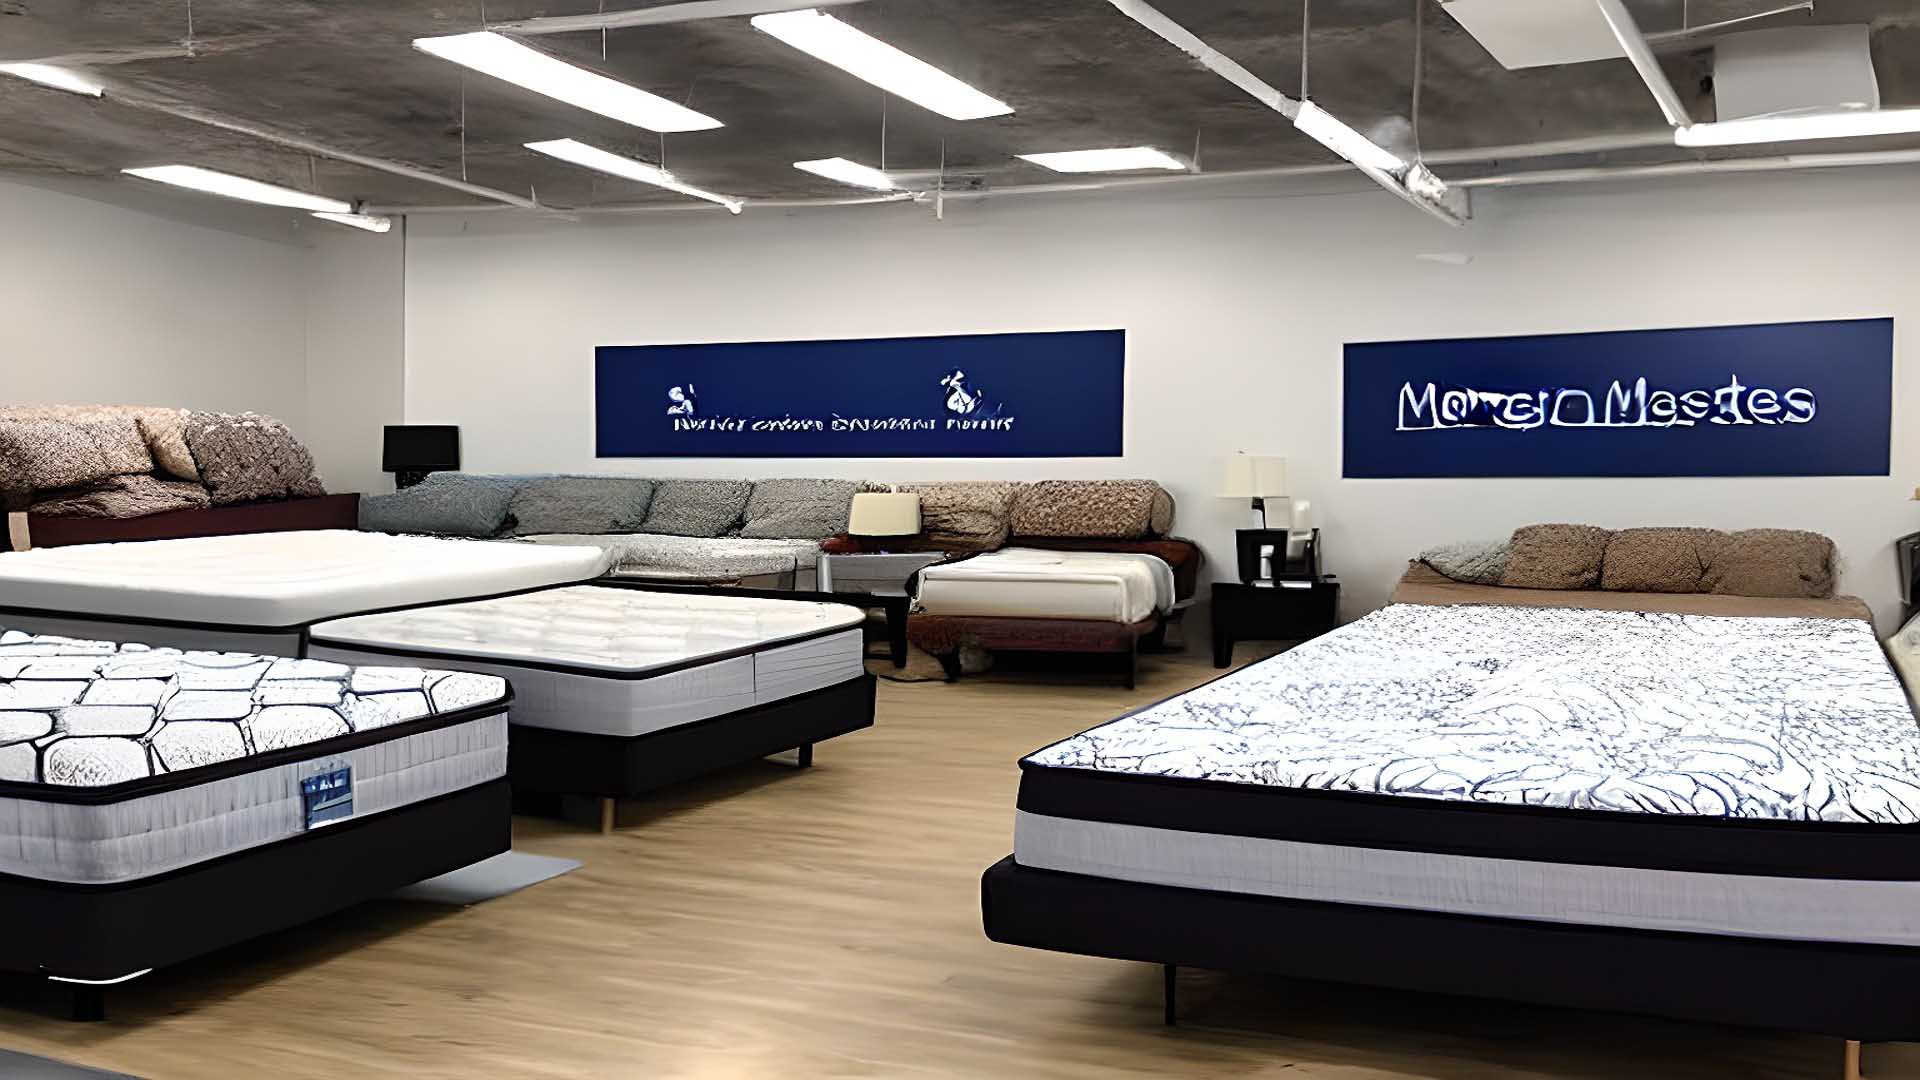 Mattress Sales & Deals in South Weymouth, MA